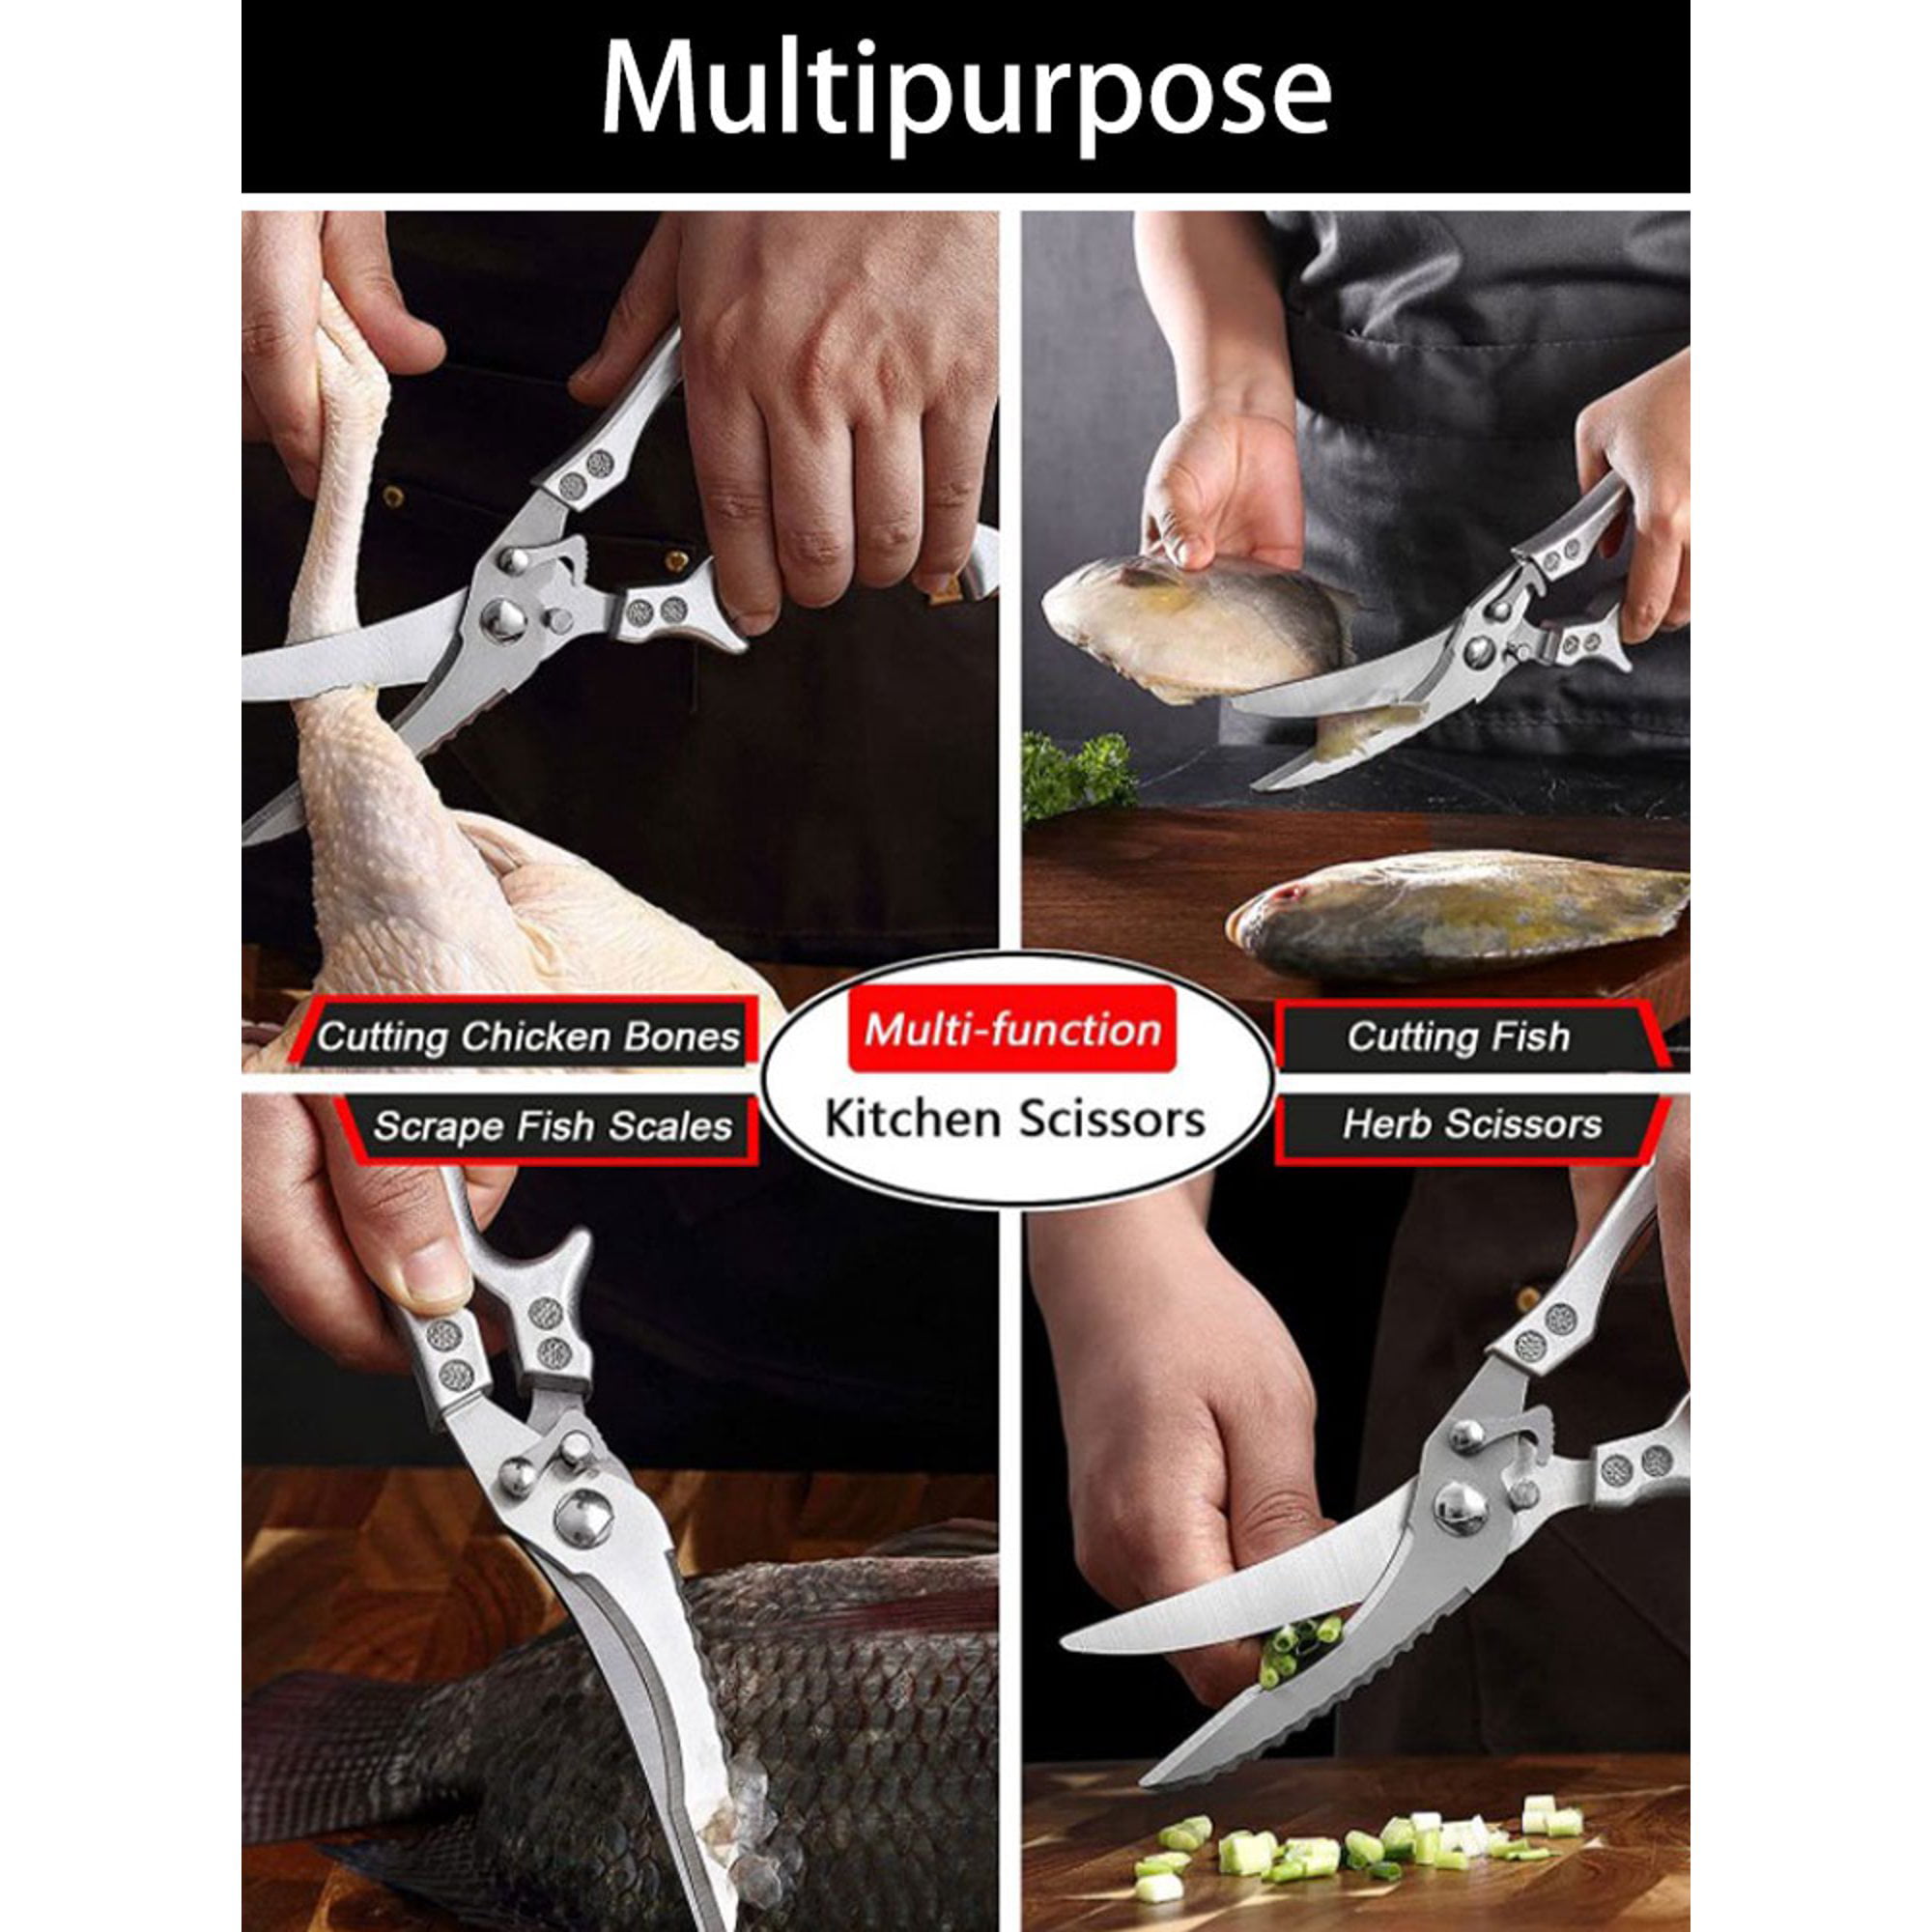 8 Multi-functional Kitchen Shears with Holder - Black - SNF Schneidteufel  Global 8 Multi-functional Kitchen Shears with Holder - Black Kitchen Shears  $40.00 SNF SNF Schneidteufel Global $40.00 Multi-functional Shears Magnetic  Holder